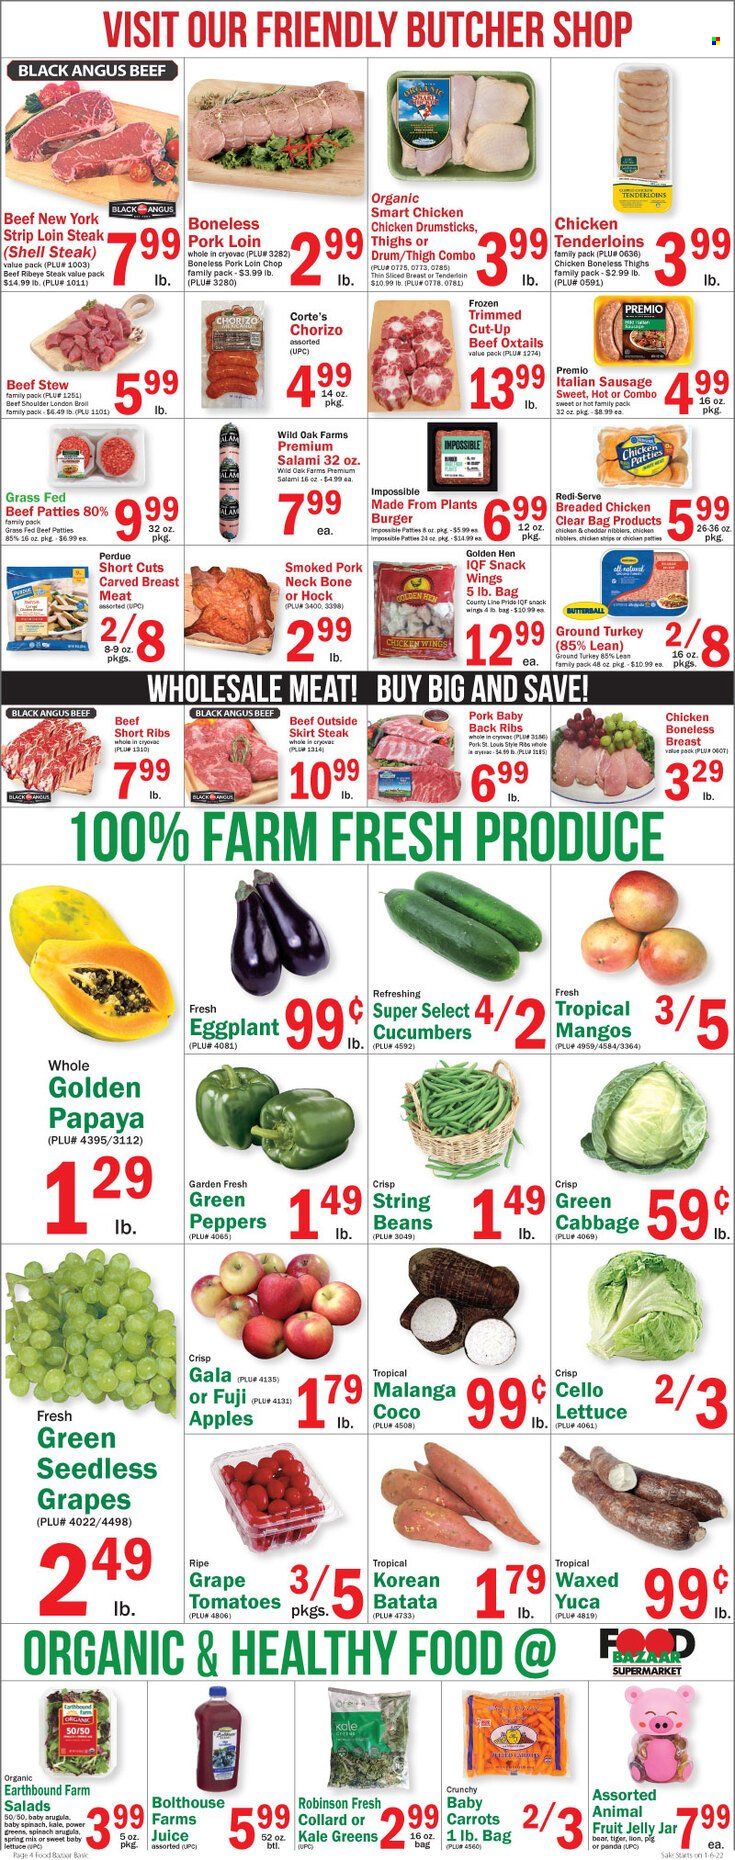 thumbnail - Food Bazaar Flyer - 01/06/2022 - 01/12/2022 - Sales products - seedless grapes, arugula, beans, cabbage, carrots, cucumber, tomatoes, kale, eggplant, apples, Gala, Fuji apple, hamburger, fried chicken, Perdue®, Butterball, salami, chorizo, italian sausage, cheese, chicken wings, snack, jelly, juice, ground turkey, chicken drumsticks, beef meat, beef ribs, beef steak, steak, sirloin steak, ribeye steak, pork loin, pork meat, pork ribs, pork back ribs. Page 4.